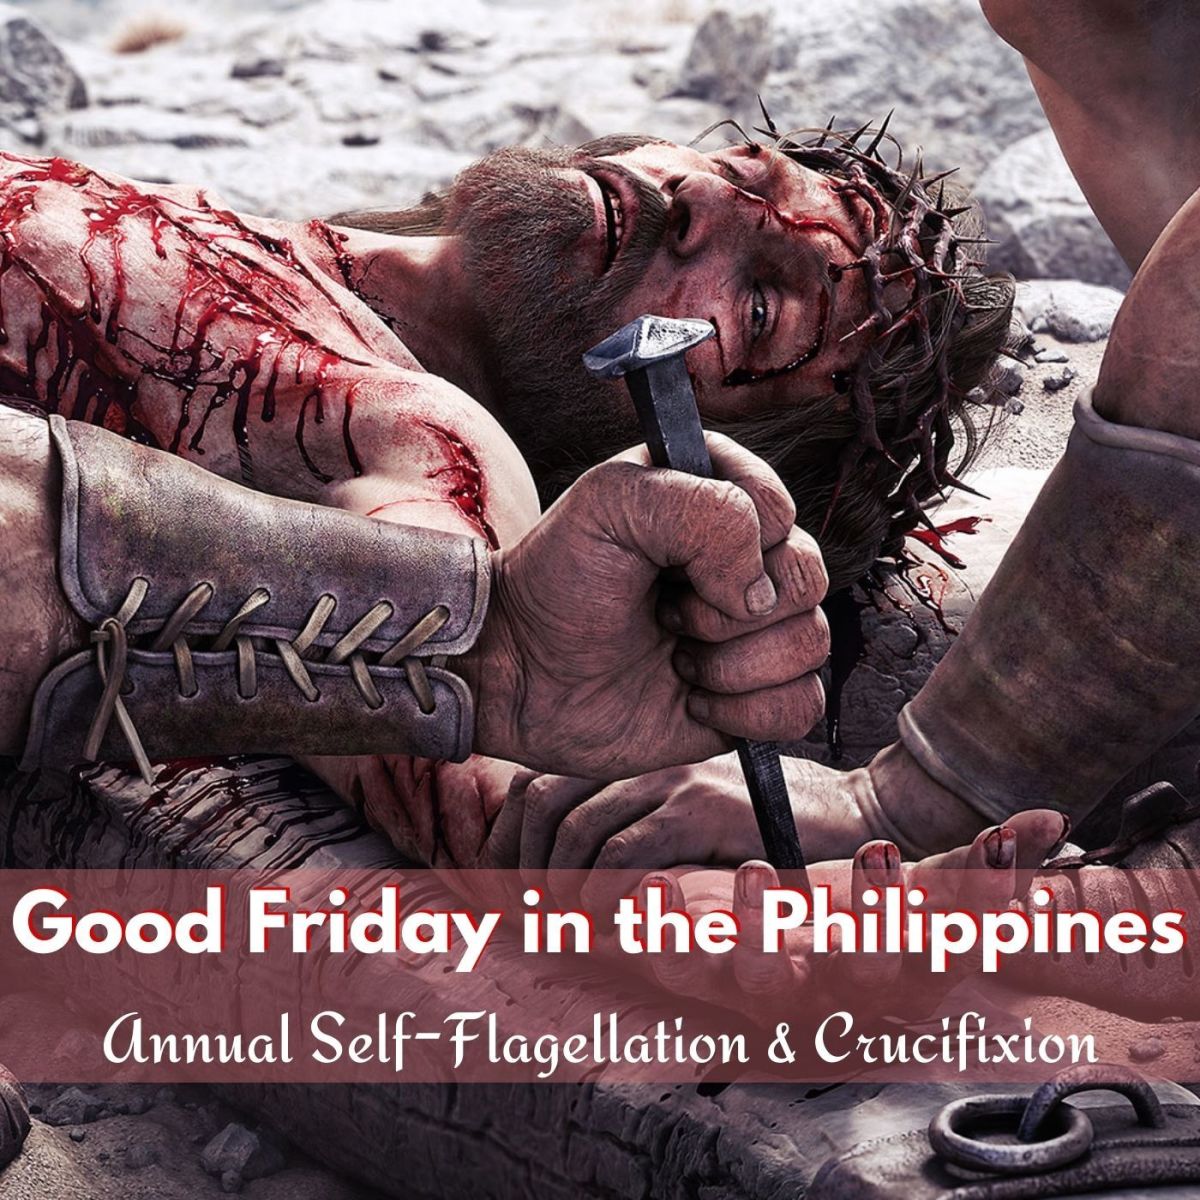 Discouraged by the church, these Easter traditions in the Philippines still continues